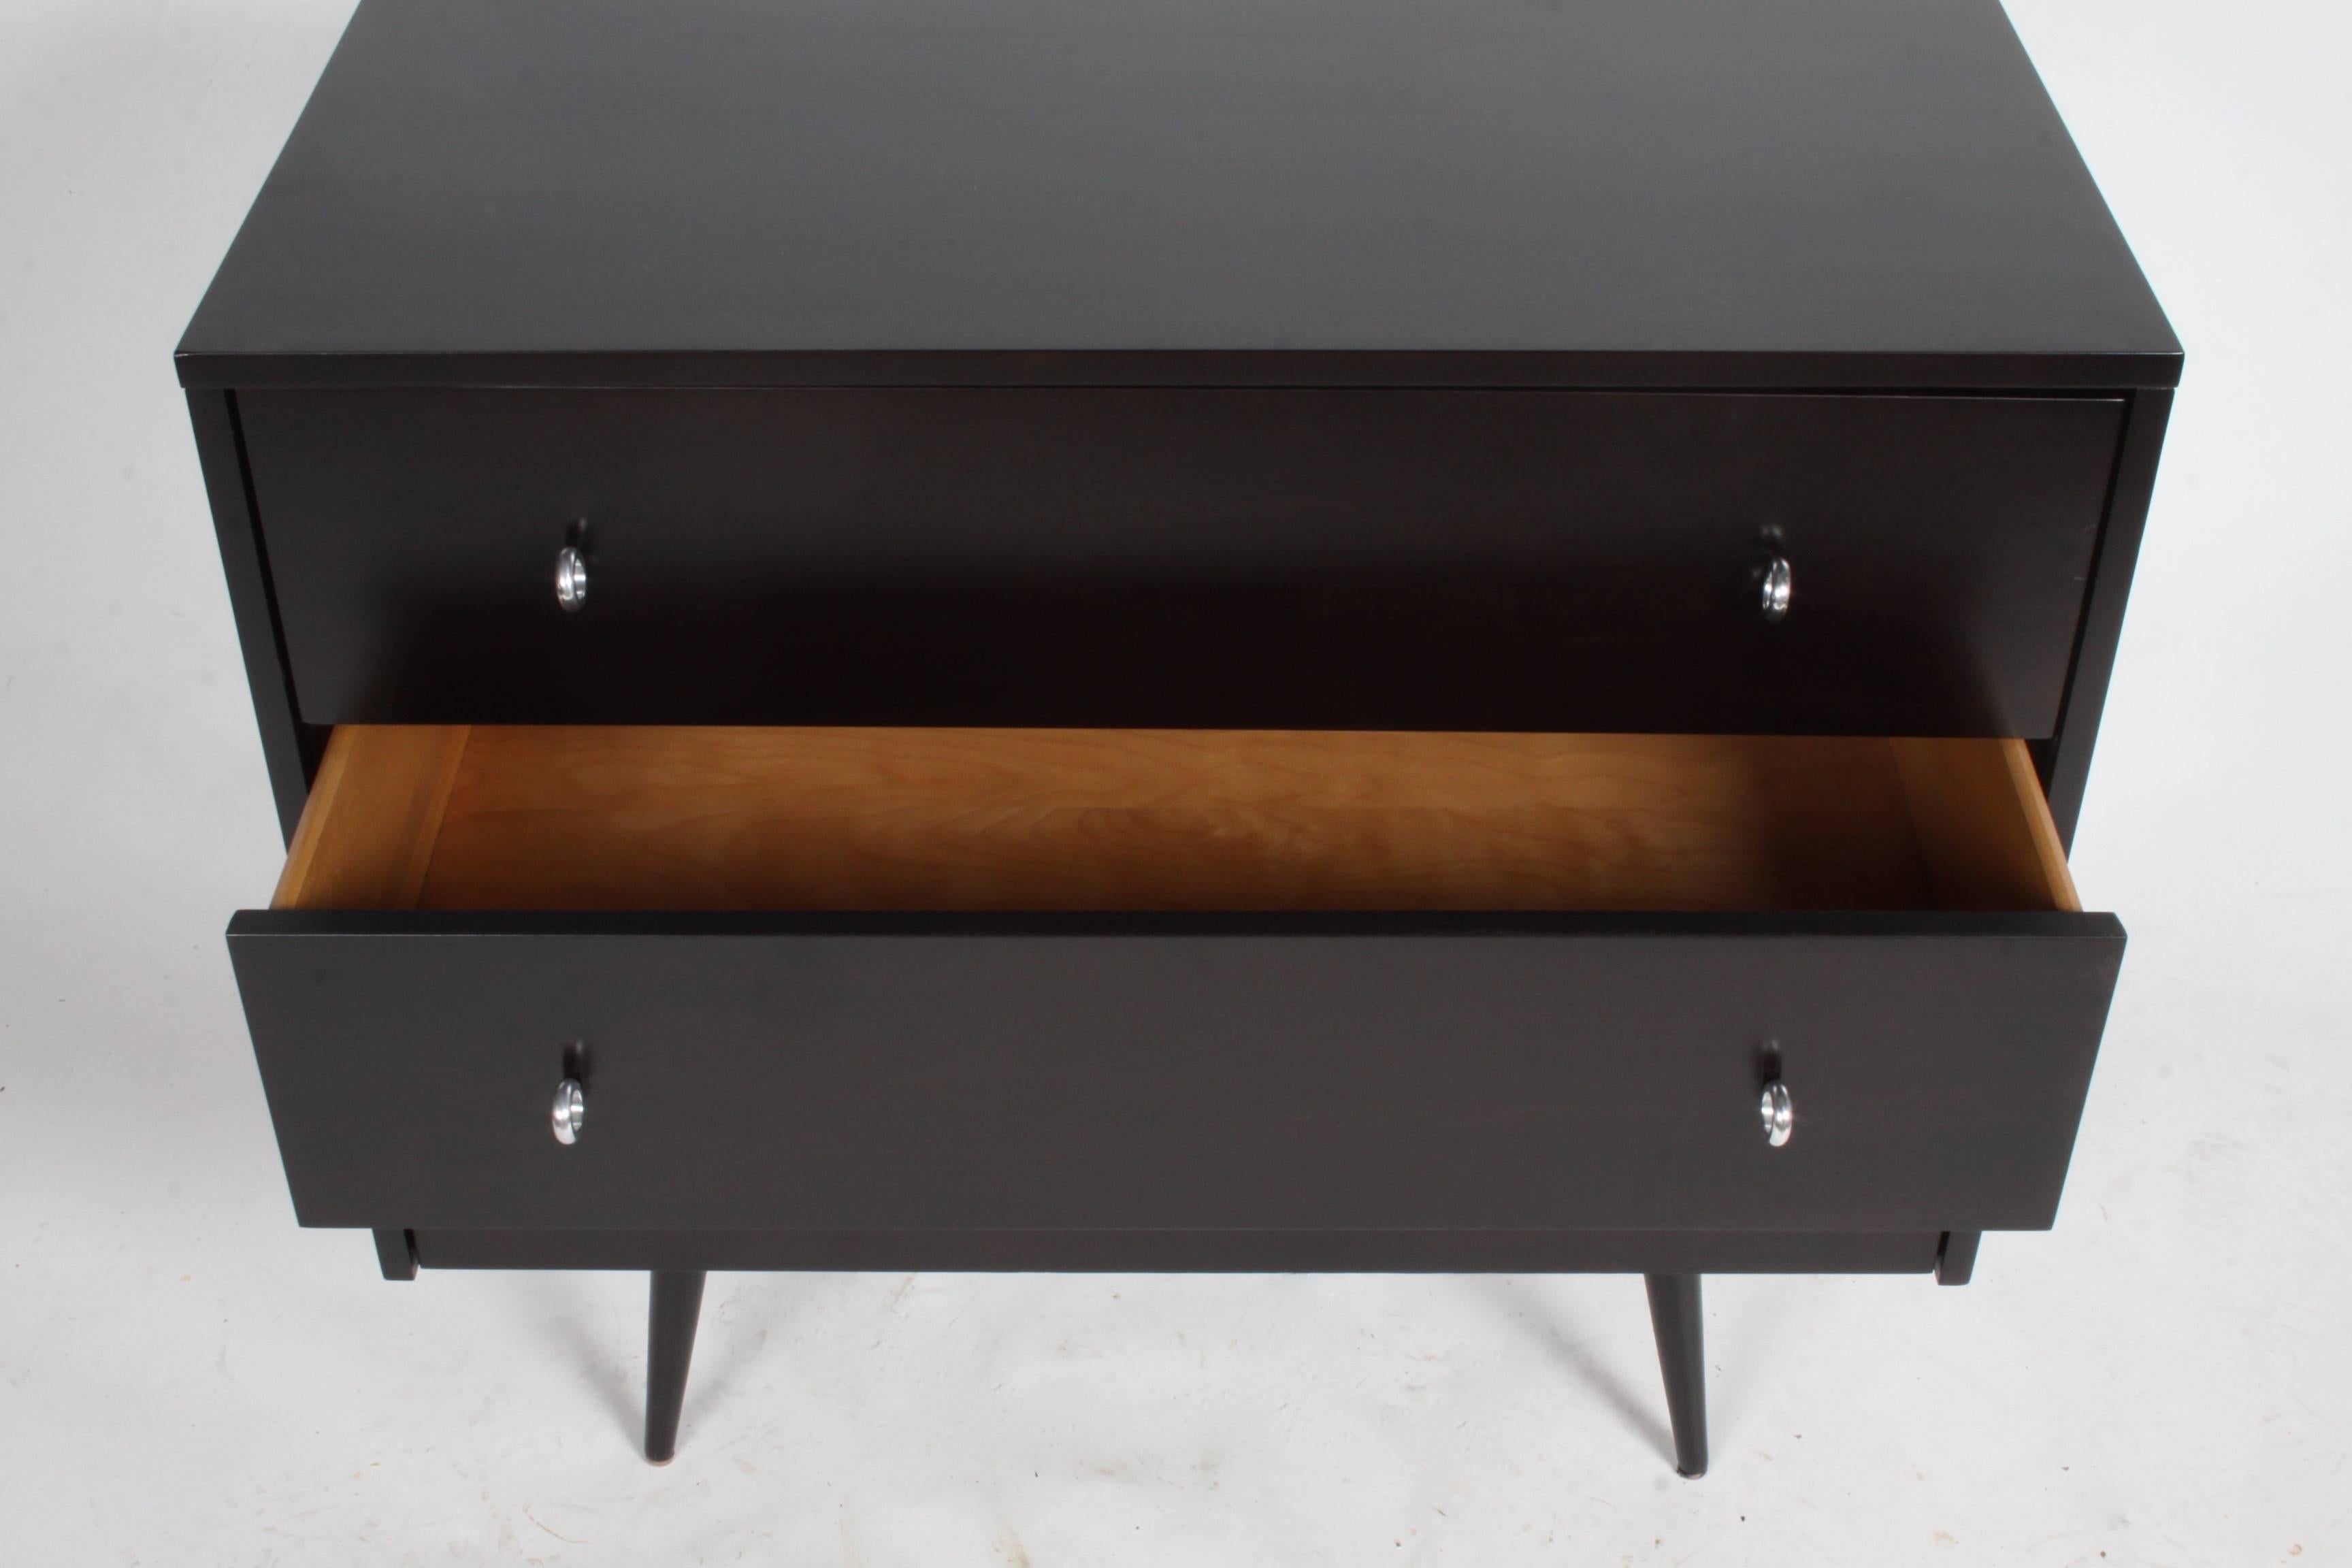 Pair of Paul McCobb Planner Group chests or dressers, circa 1950s. Completely restored and refinished in a dark ebony finish, with original aluminum round ring pulls on taper legs. Excellent condition.